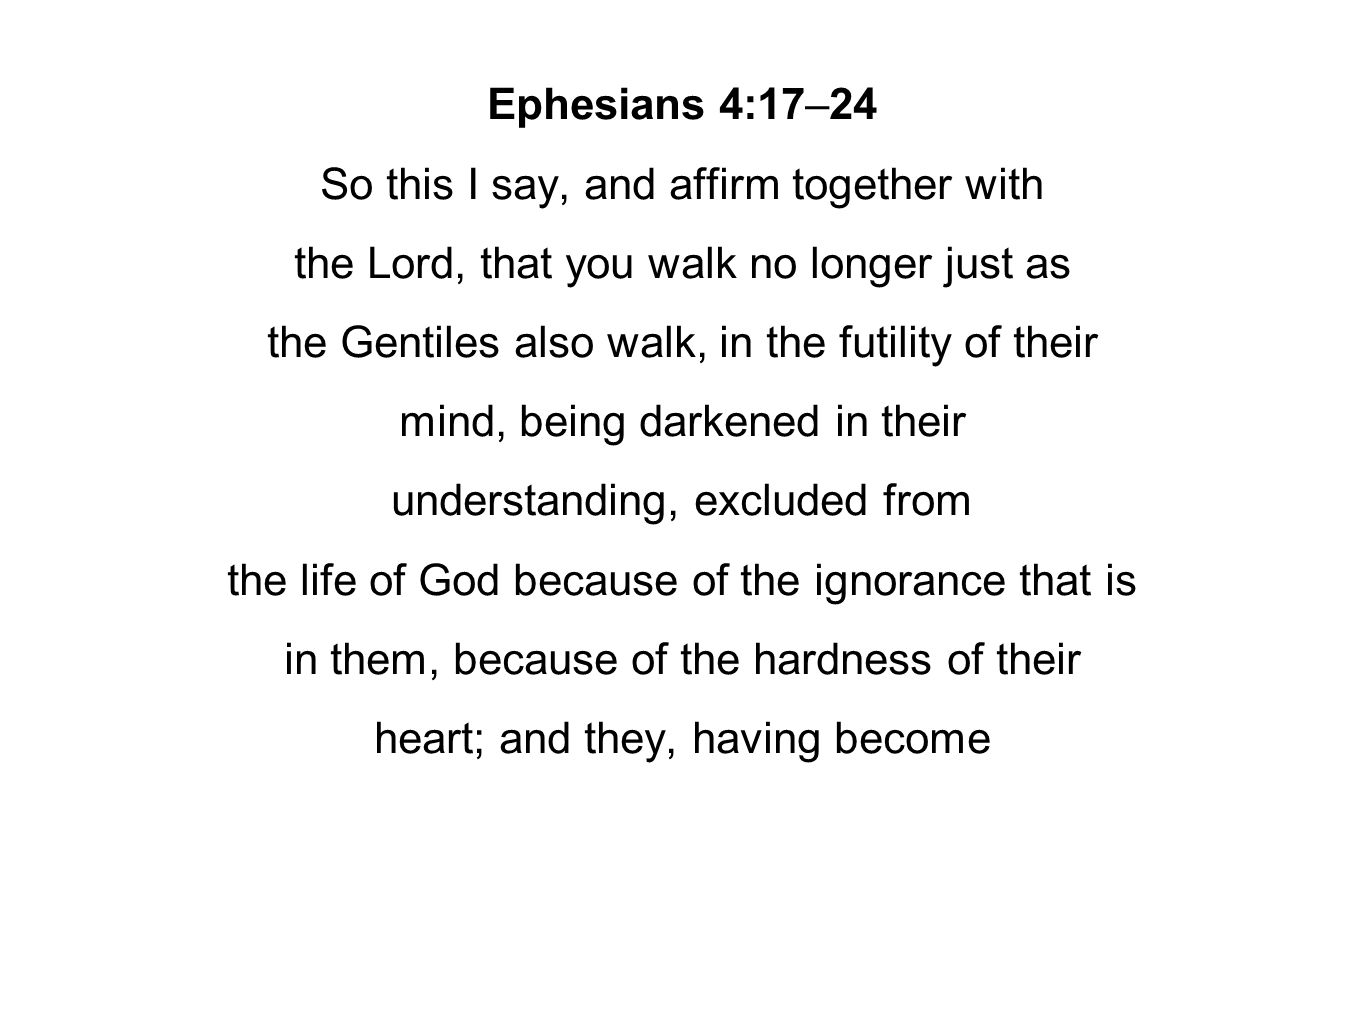 Ephesians 4:17–24 So this I say, and affirm together with the Lord, that you walk no longer just as the Gentiles also walk, in the futility of their mind, being darkened in their understanding, excluded from the life of God because of the ignorance that is in them, because of the hardness of their heart; and they, having become